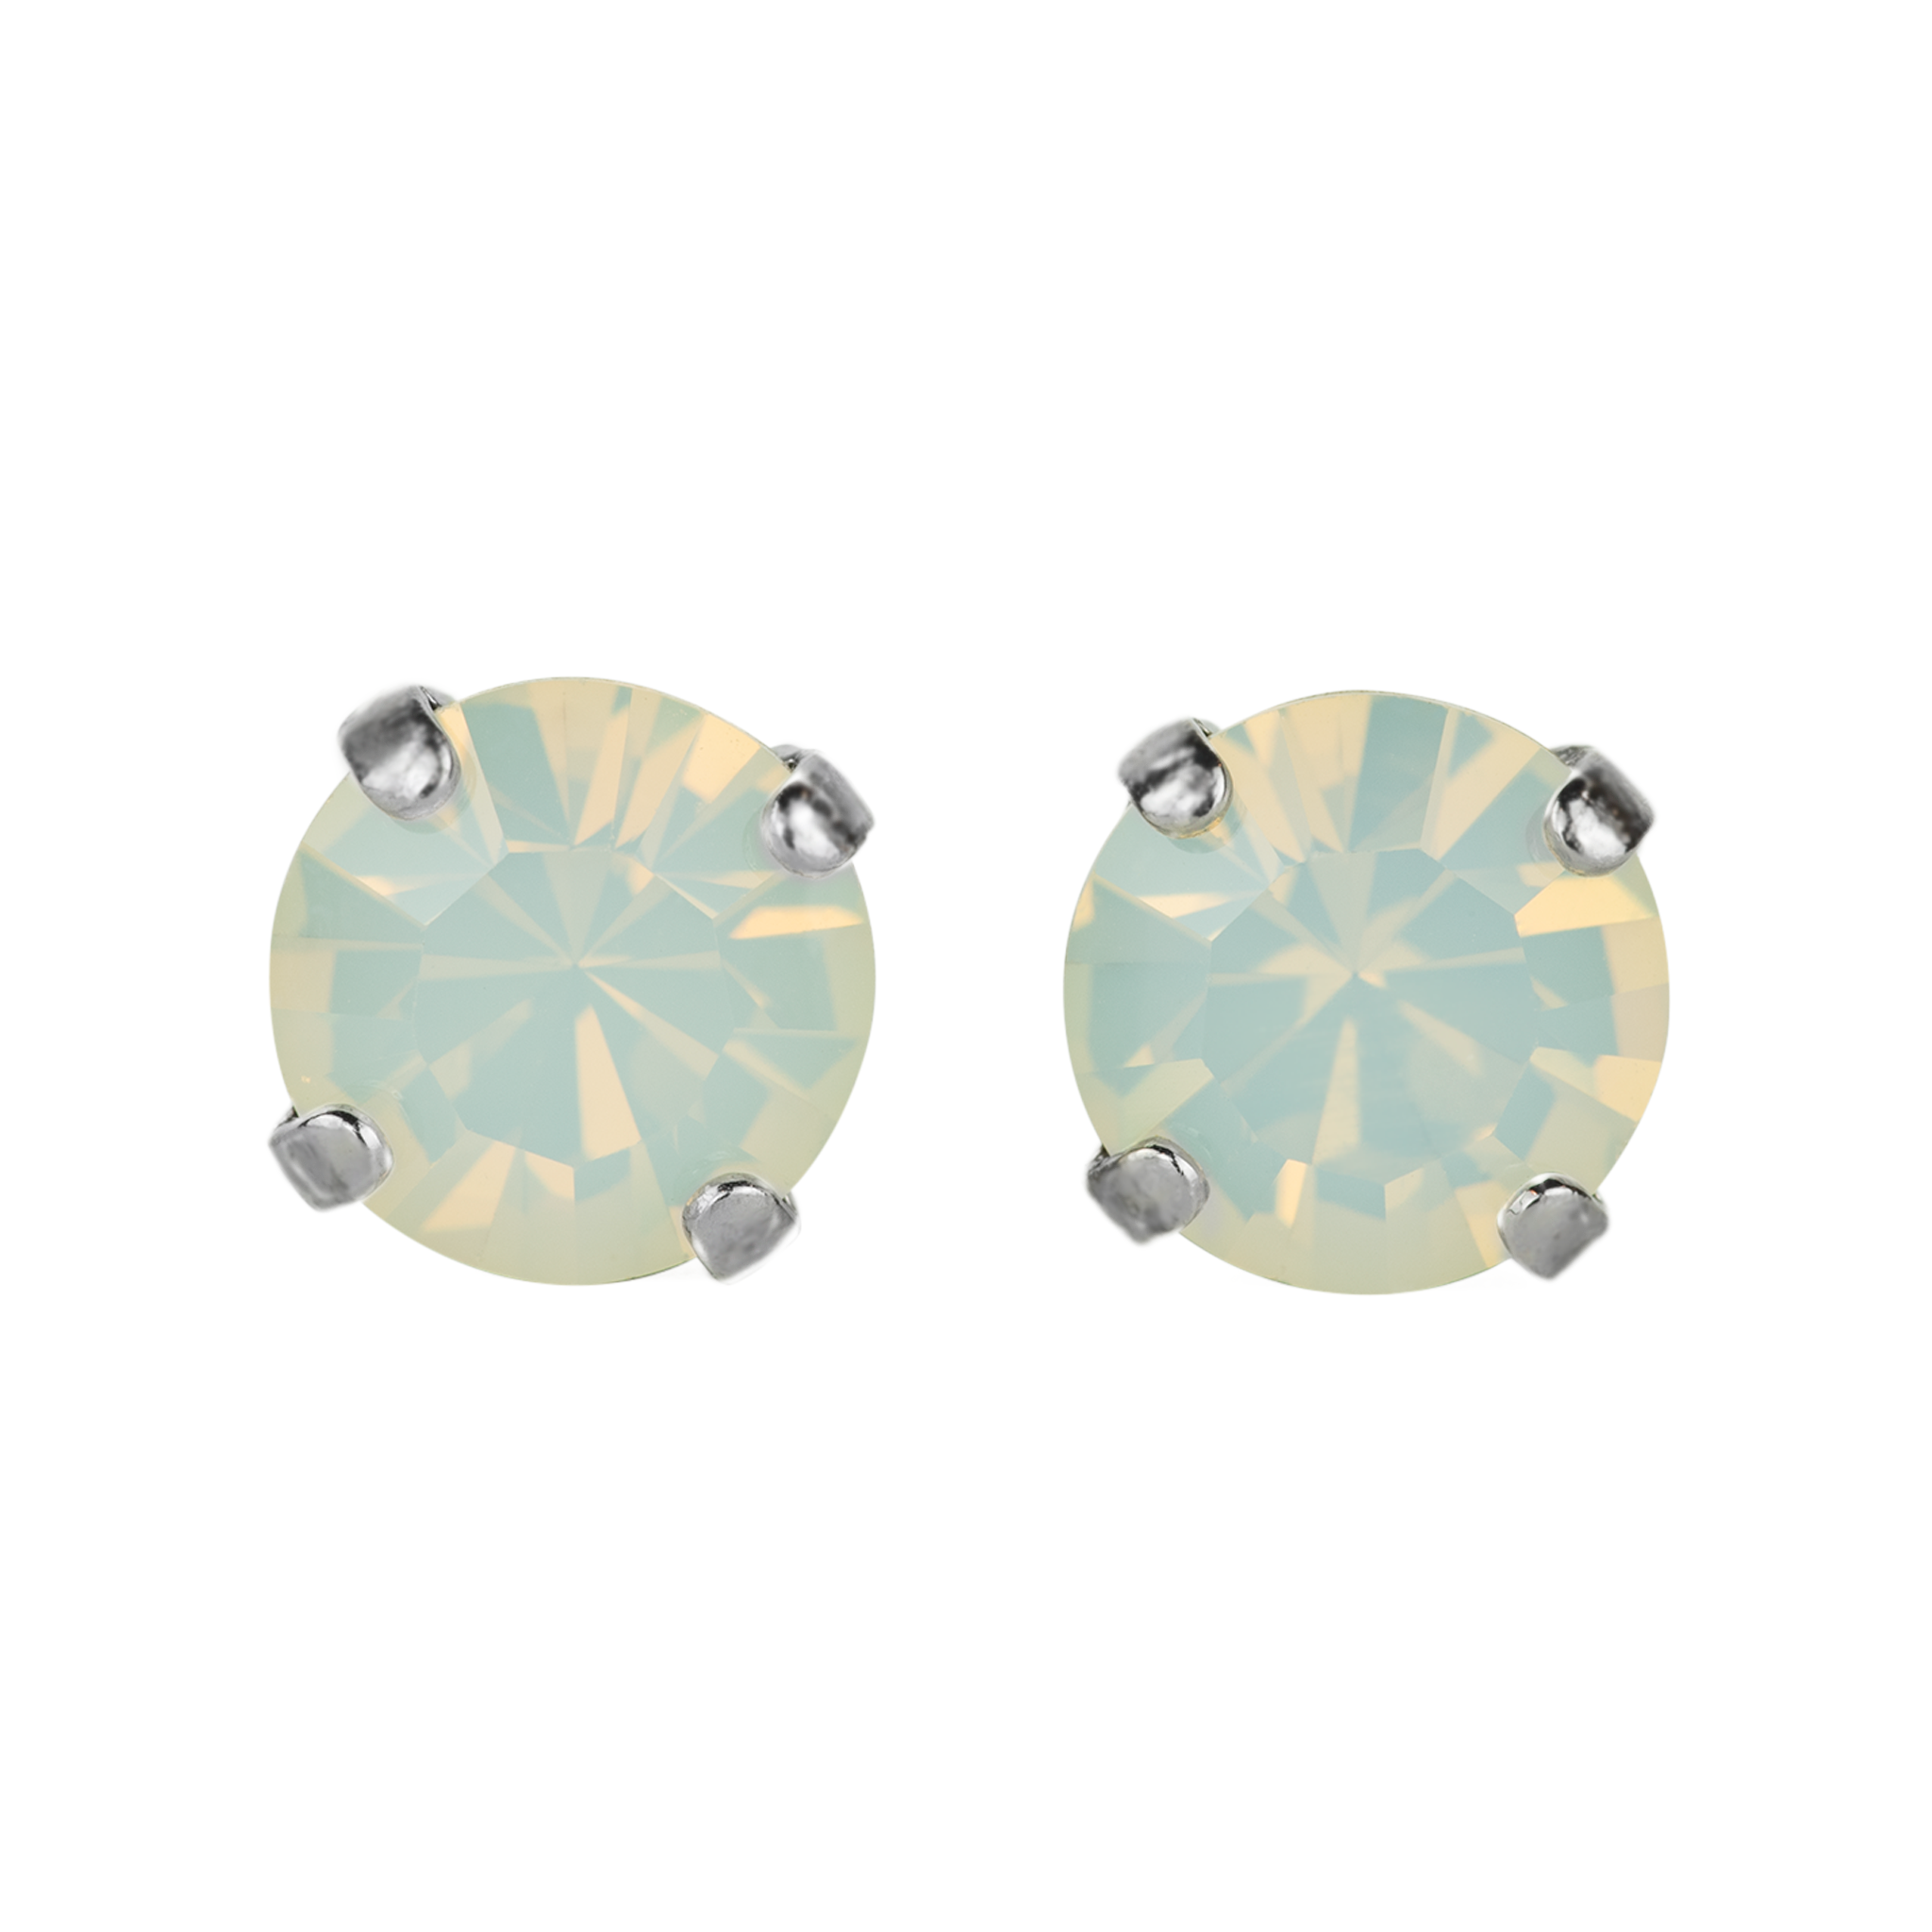 Mariana Yellow Gold Large Single Stone Post Earrings in "White Opal"